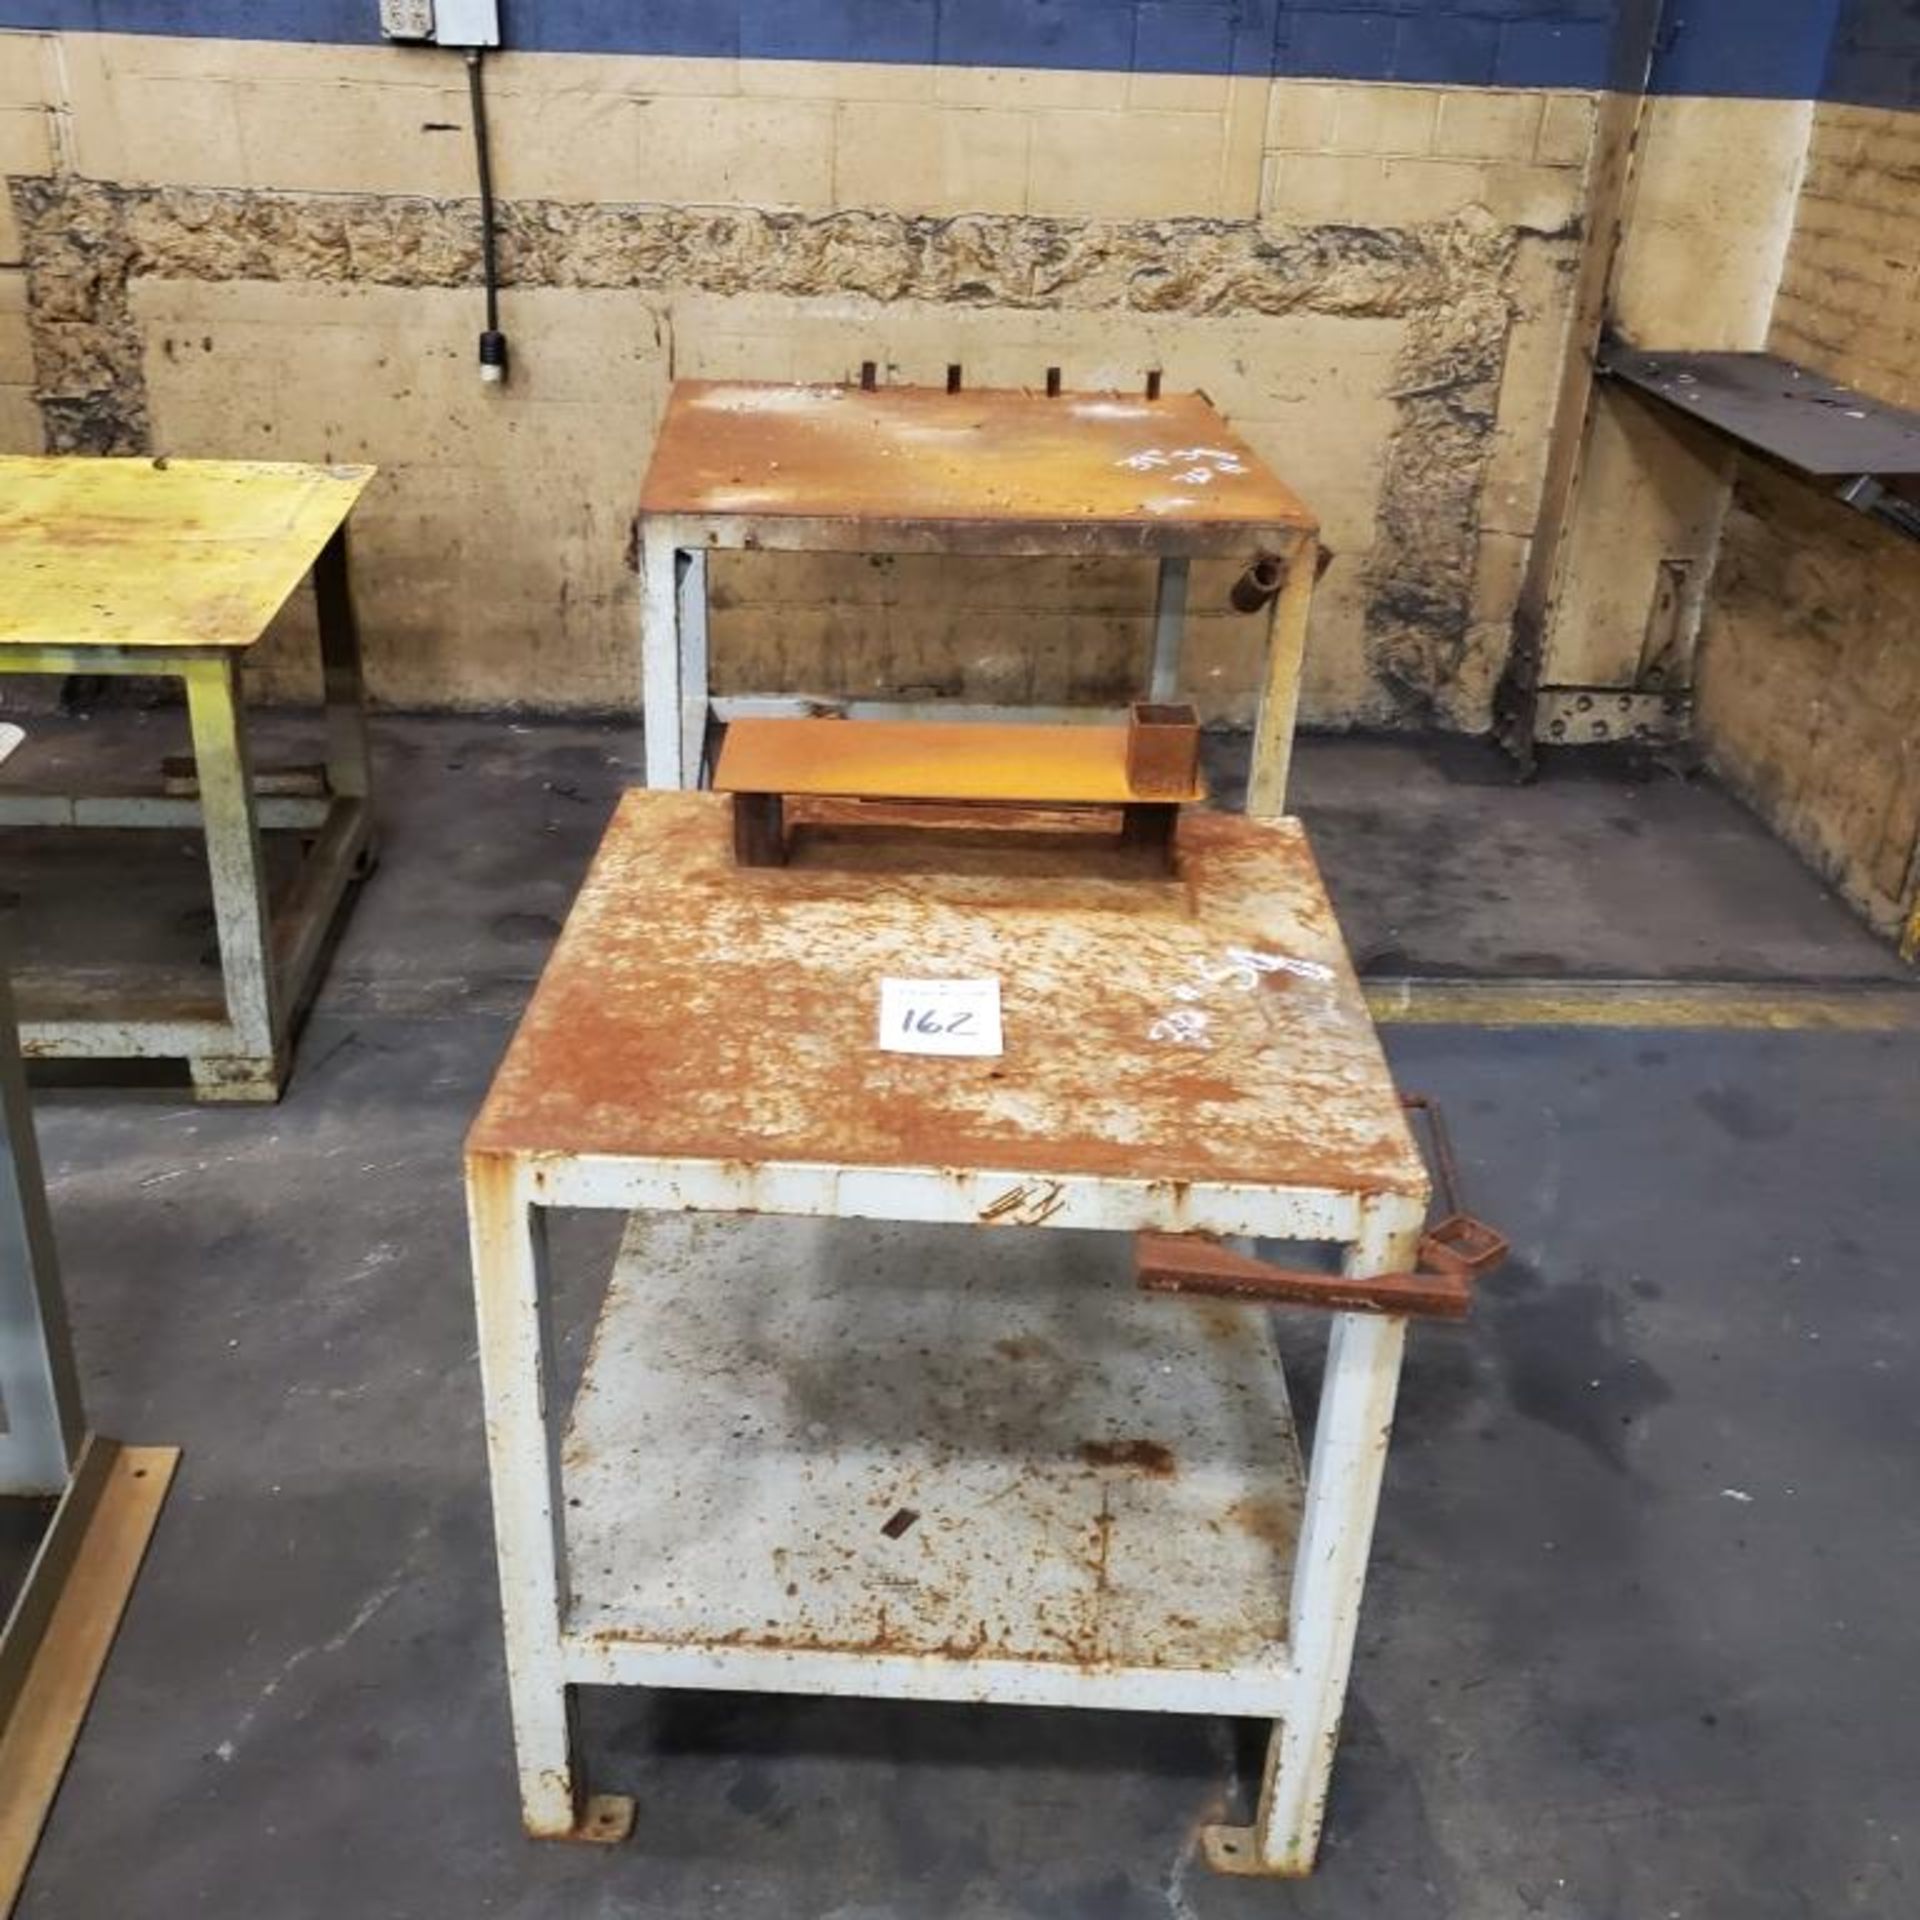 (2) Welding Tables: 39" Square x 36" H; 30" Square x 31" H